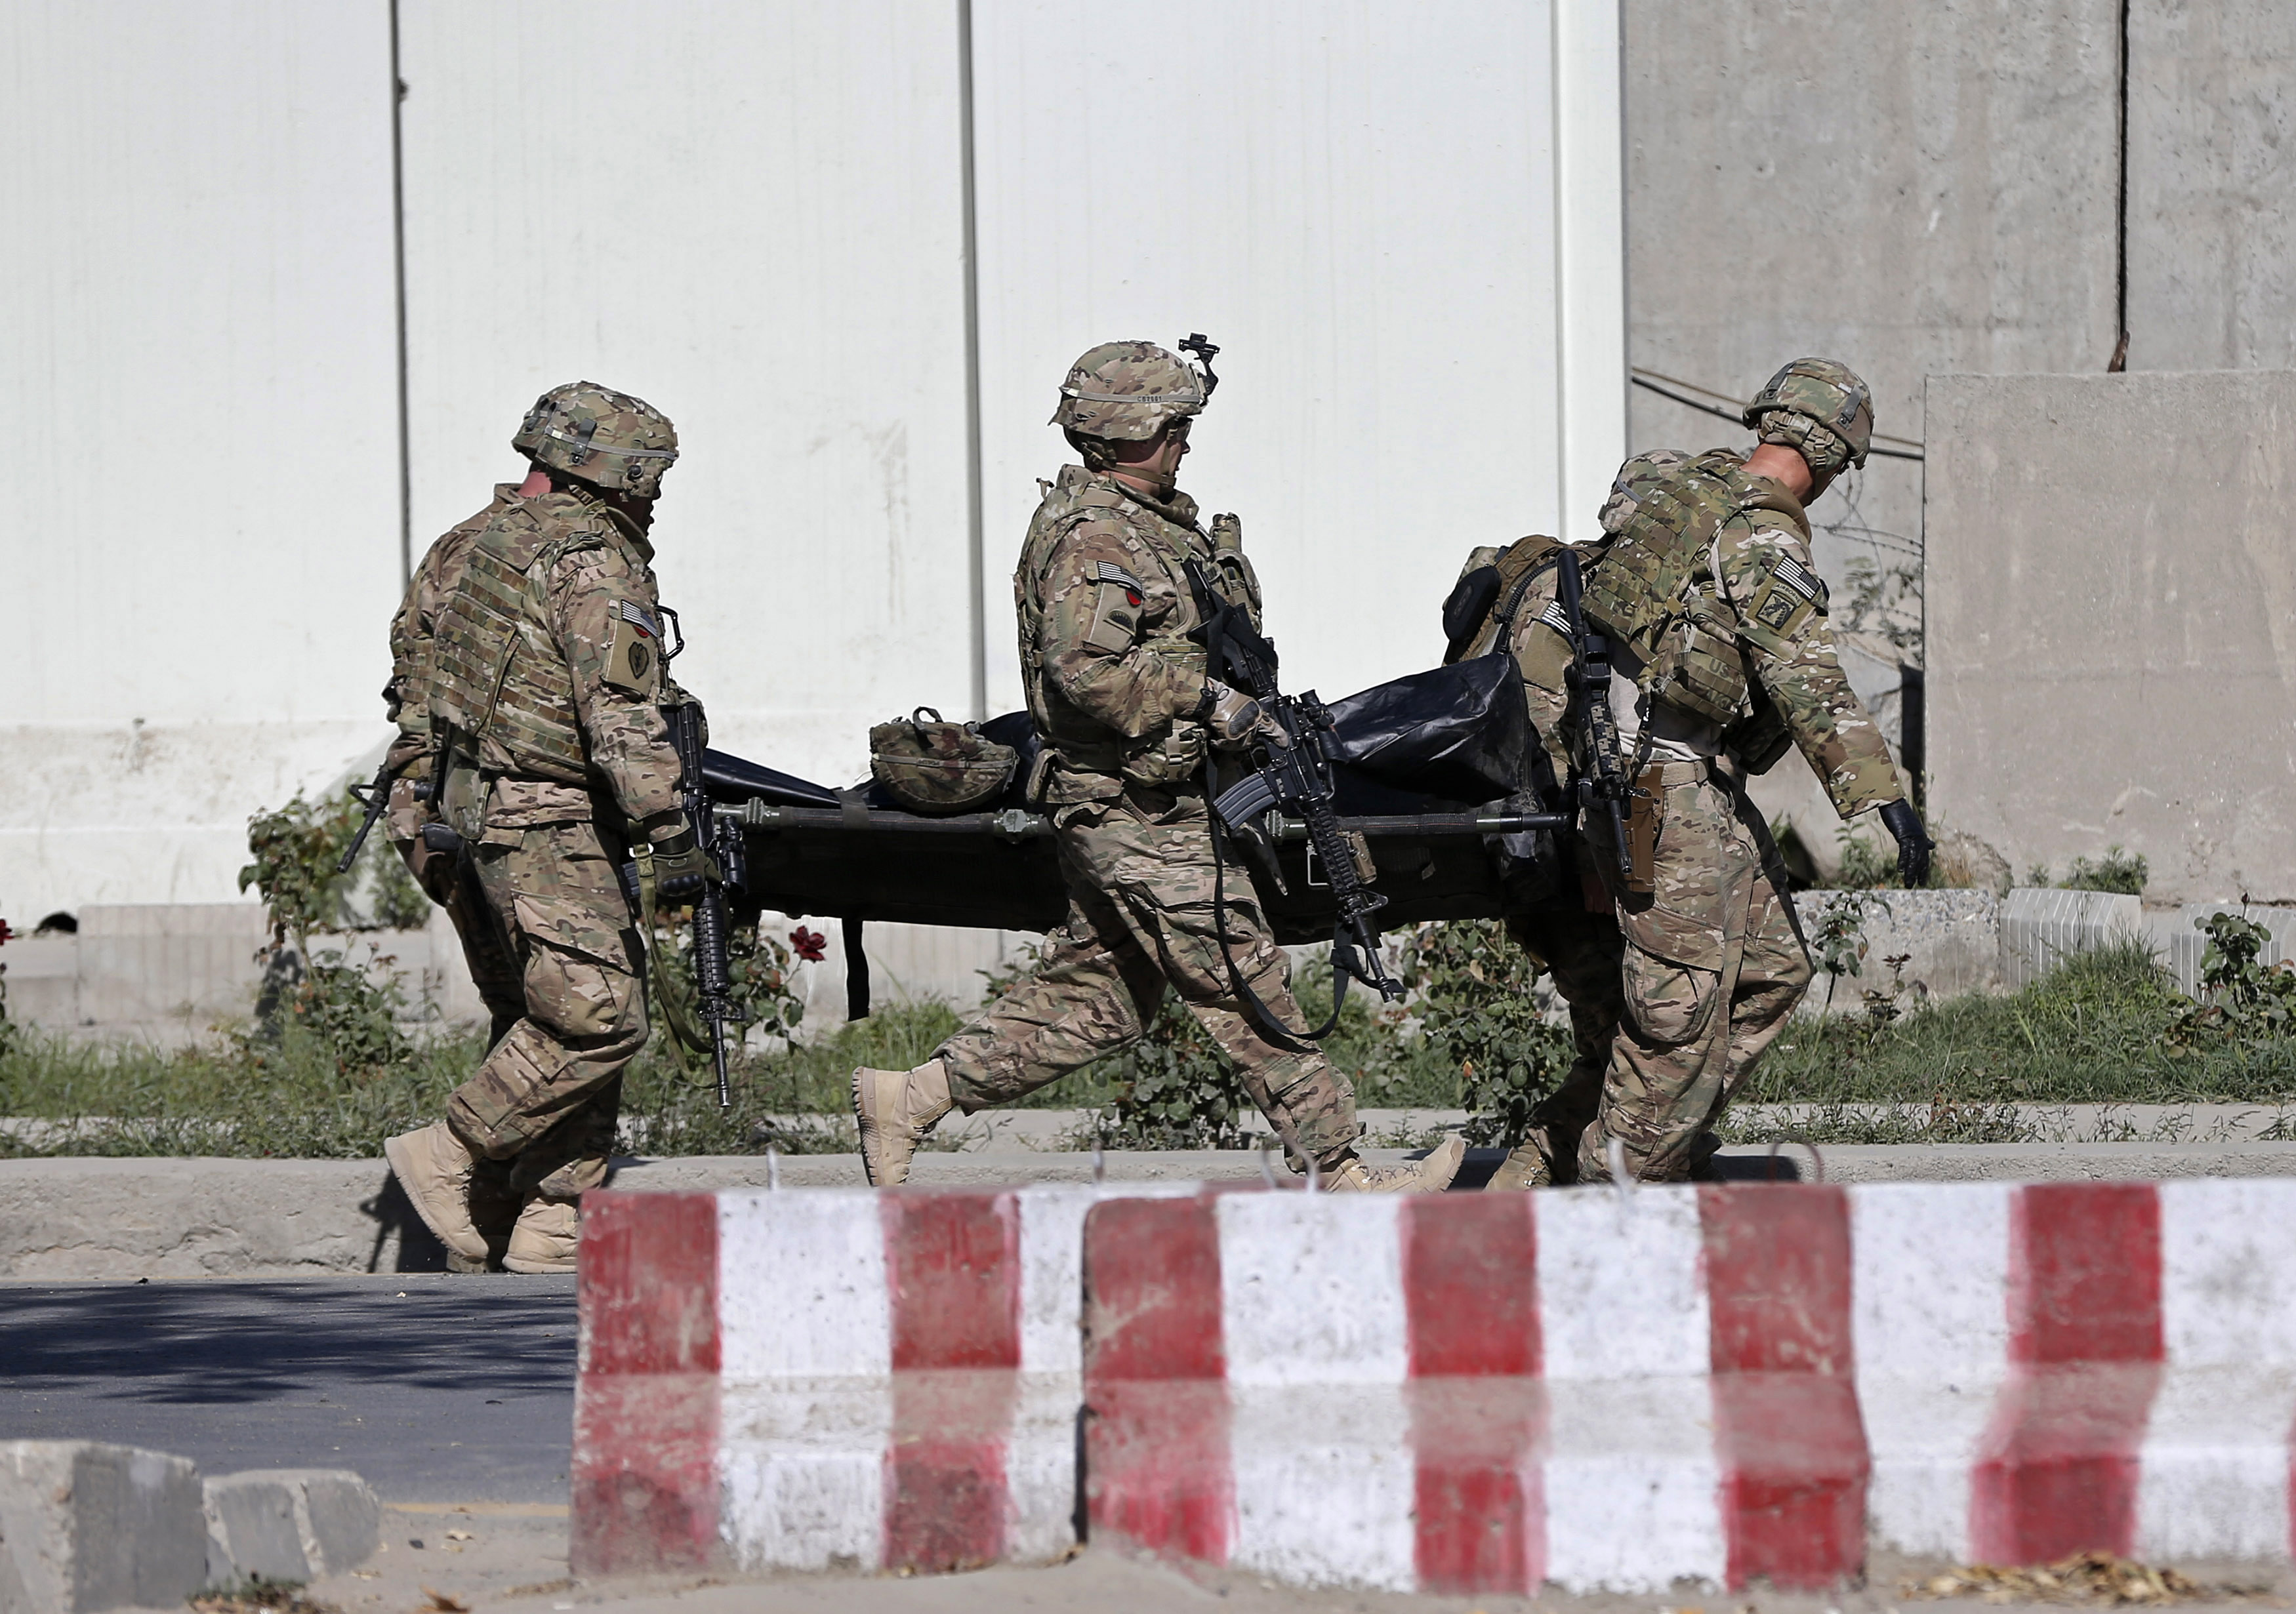 U.S. troops carry the dead body of a member of an international troop at the site of suicide attack in Kabul